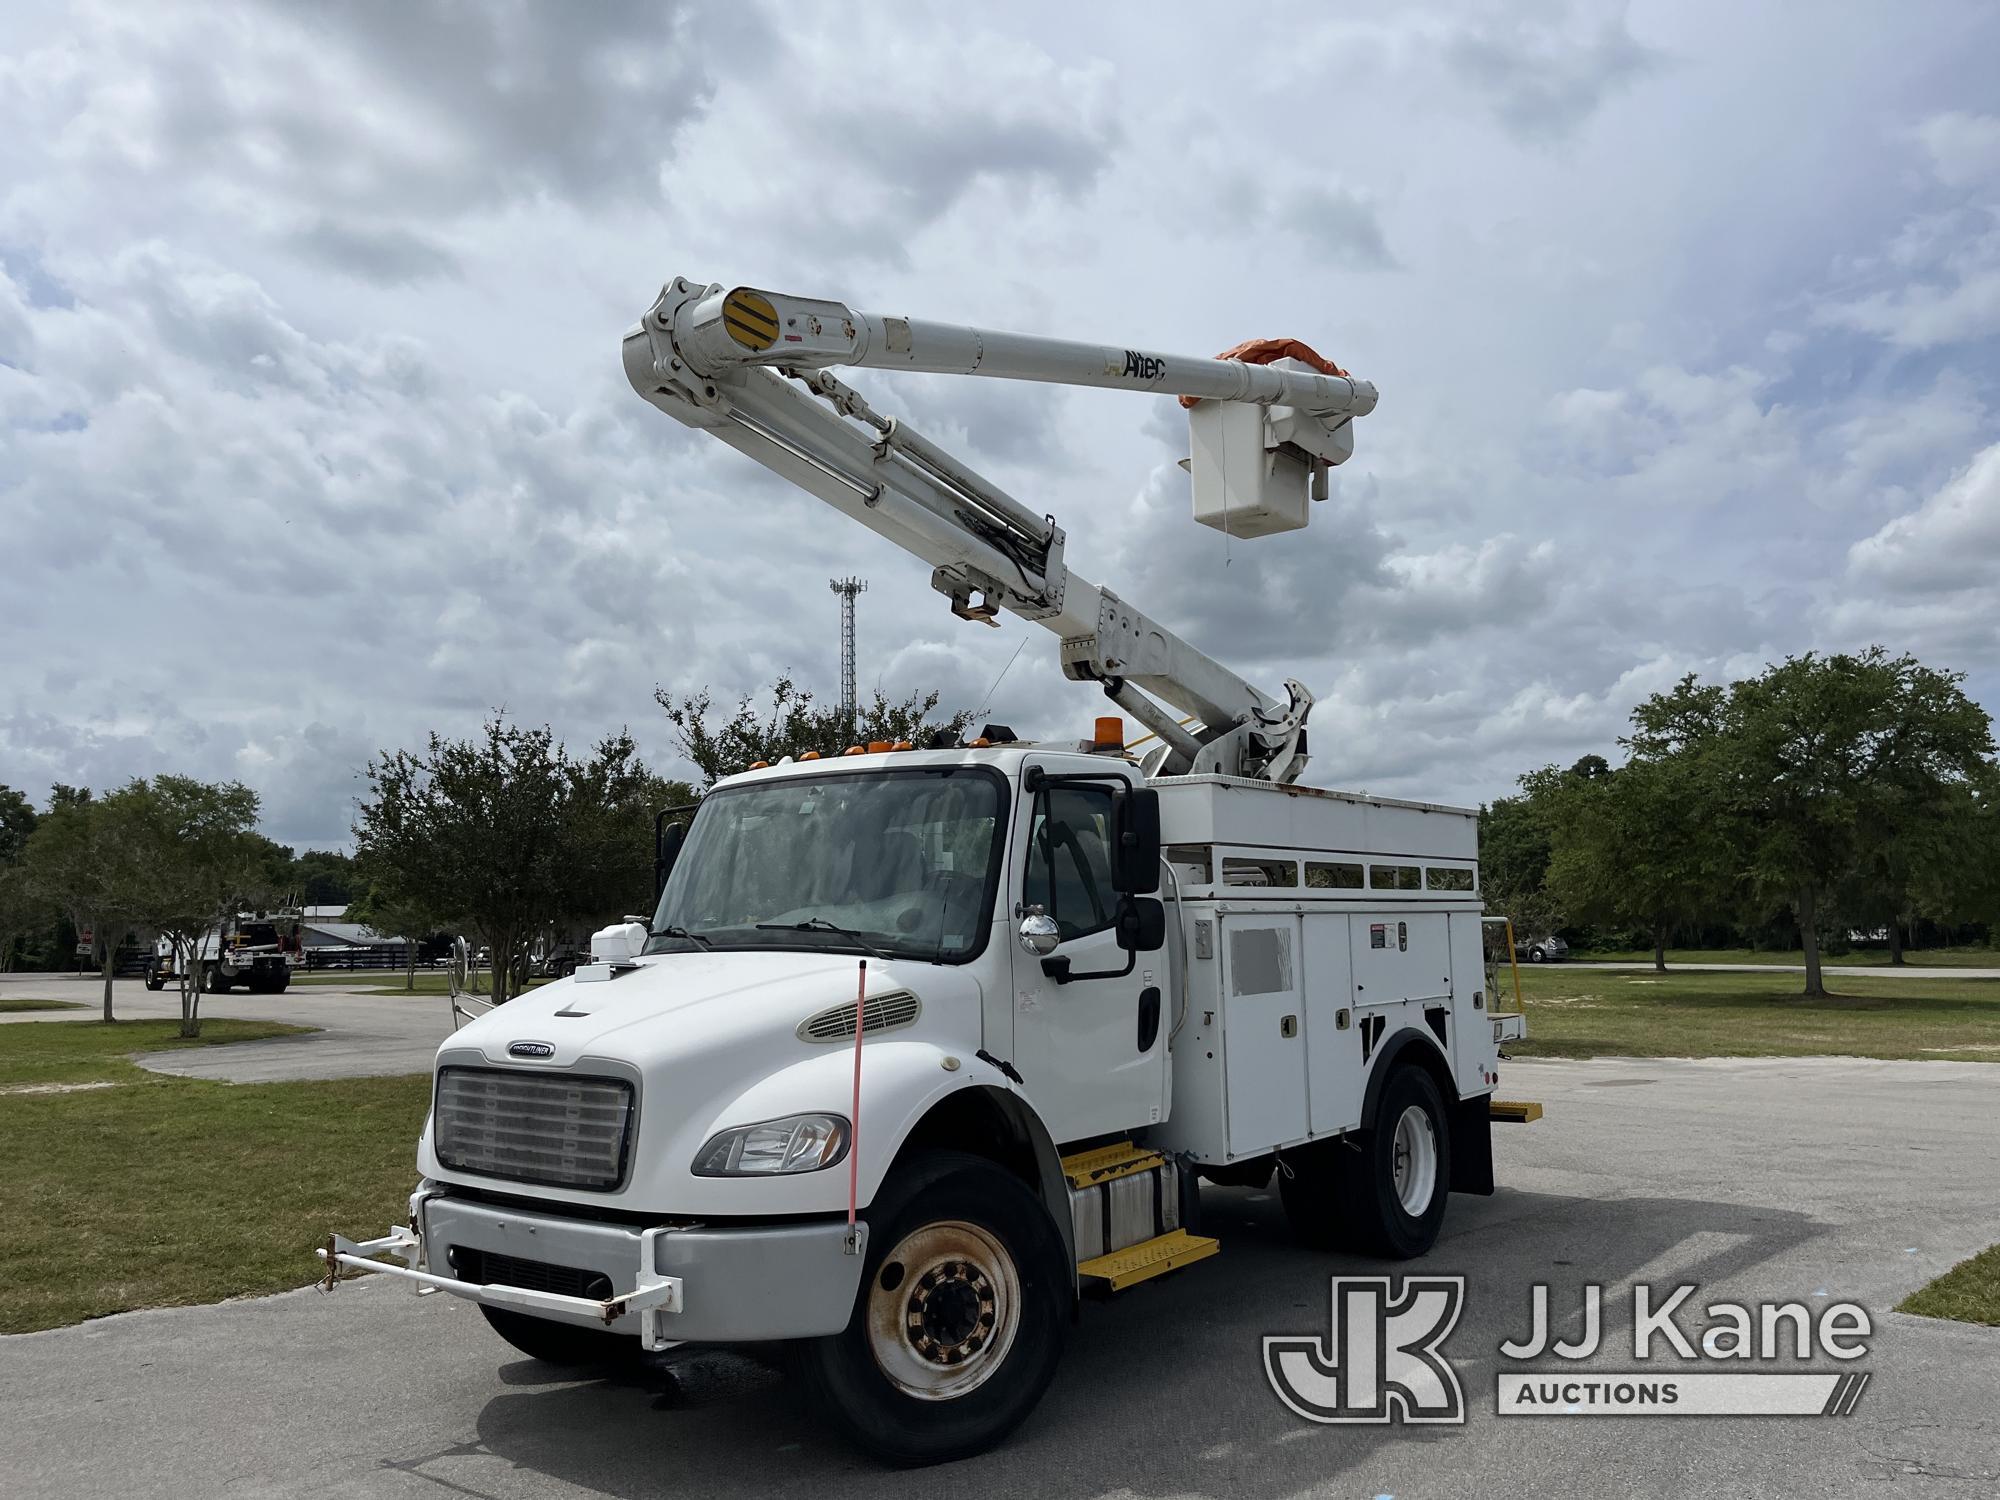 (Ocala, FL) Altec L42A, Over-Center Bucket Truck center mounted on 2014 Freightliner M2 106 Utility